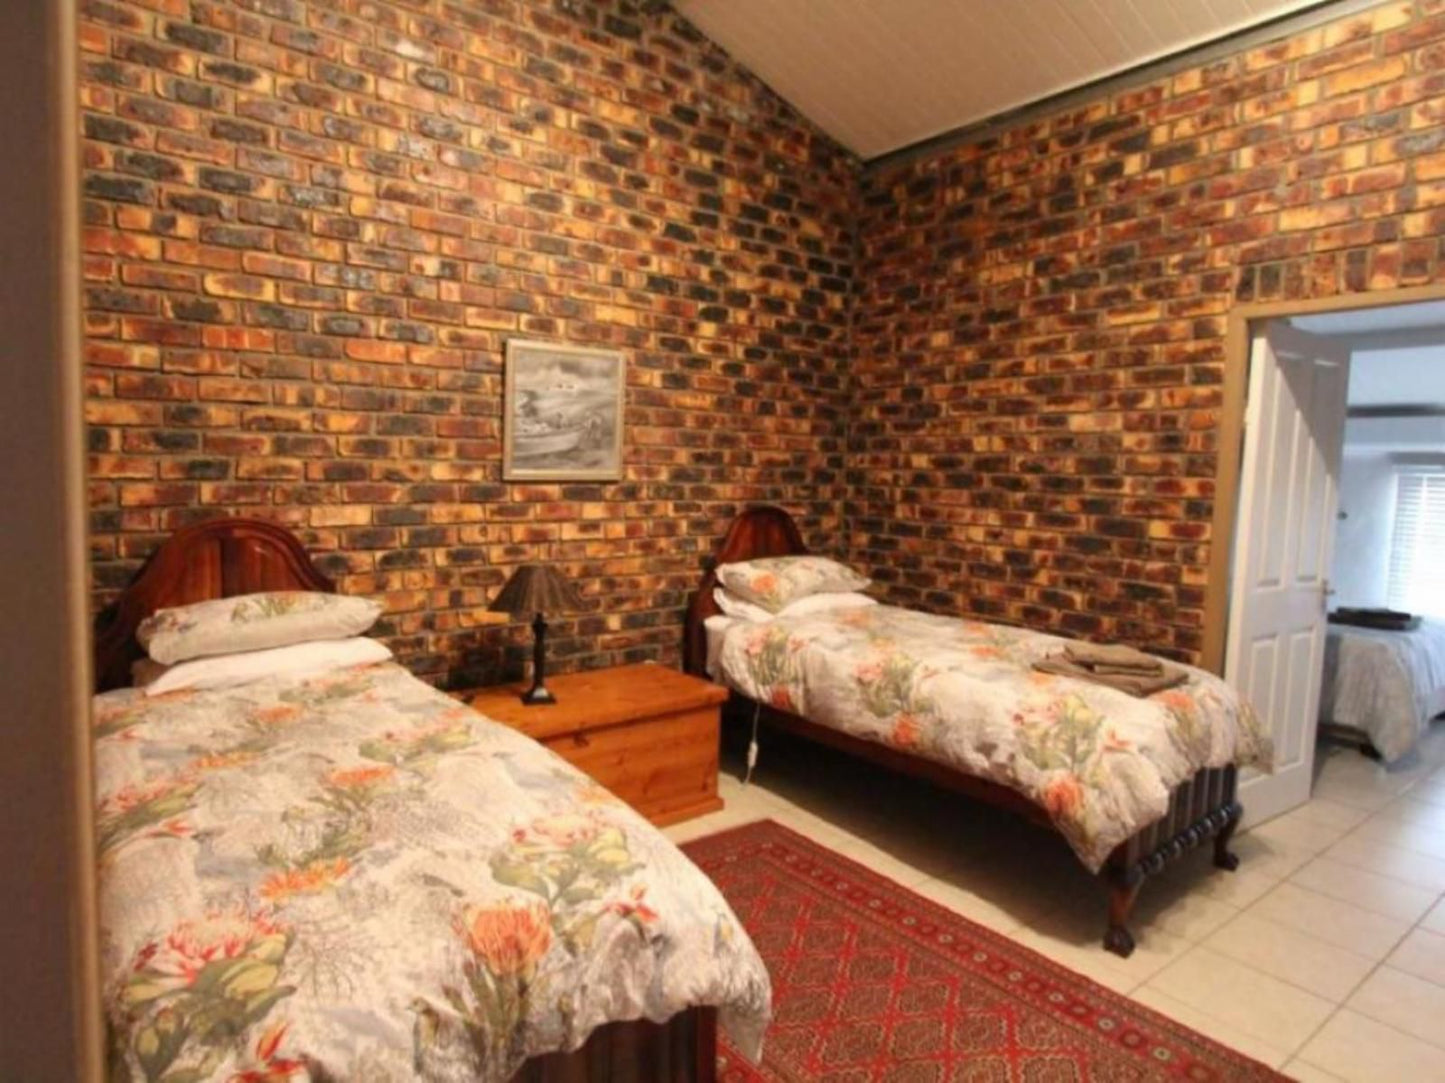 Clanwilliam Accommodation Clanwilliam Western Cape South Africa Bedroom, Brick Texture, Texture